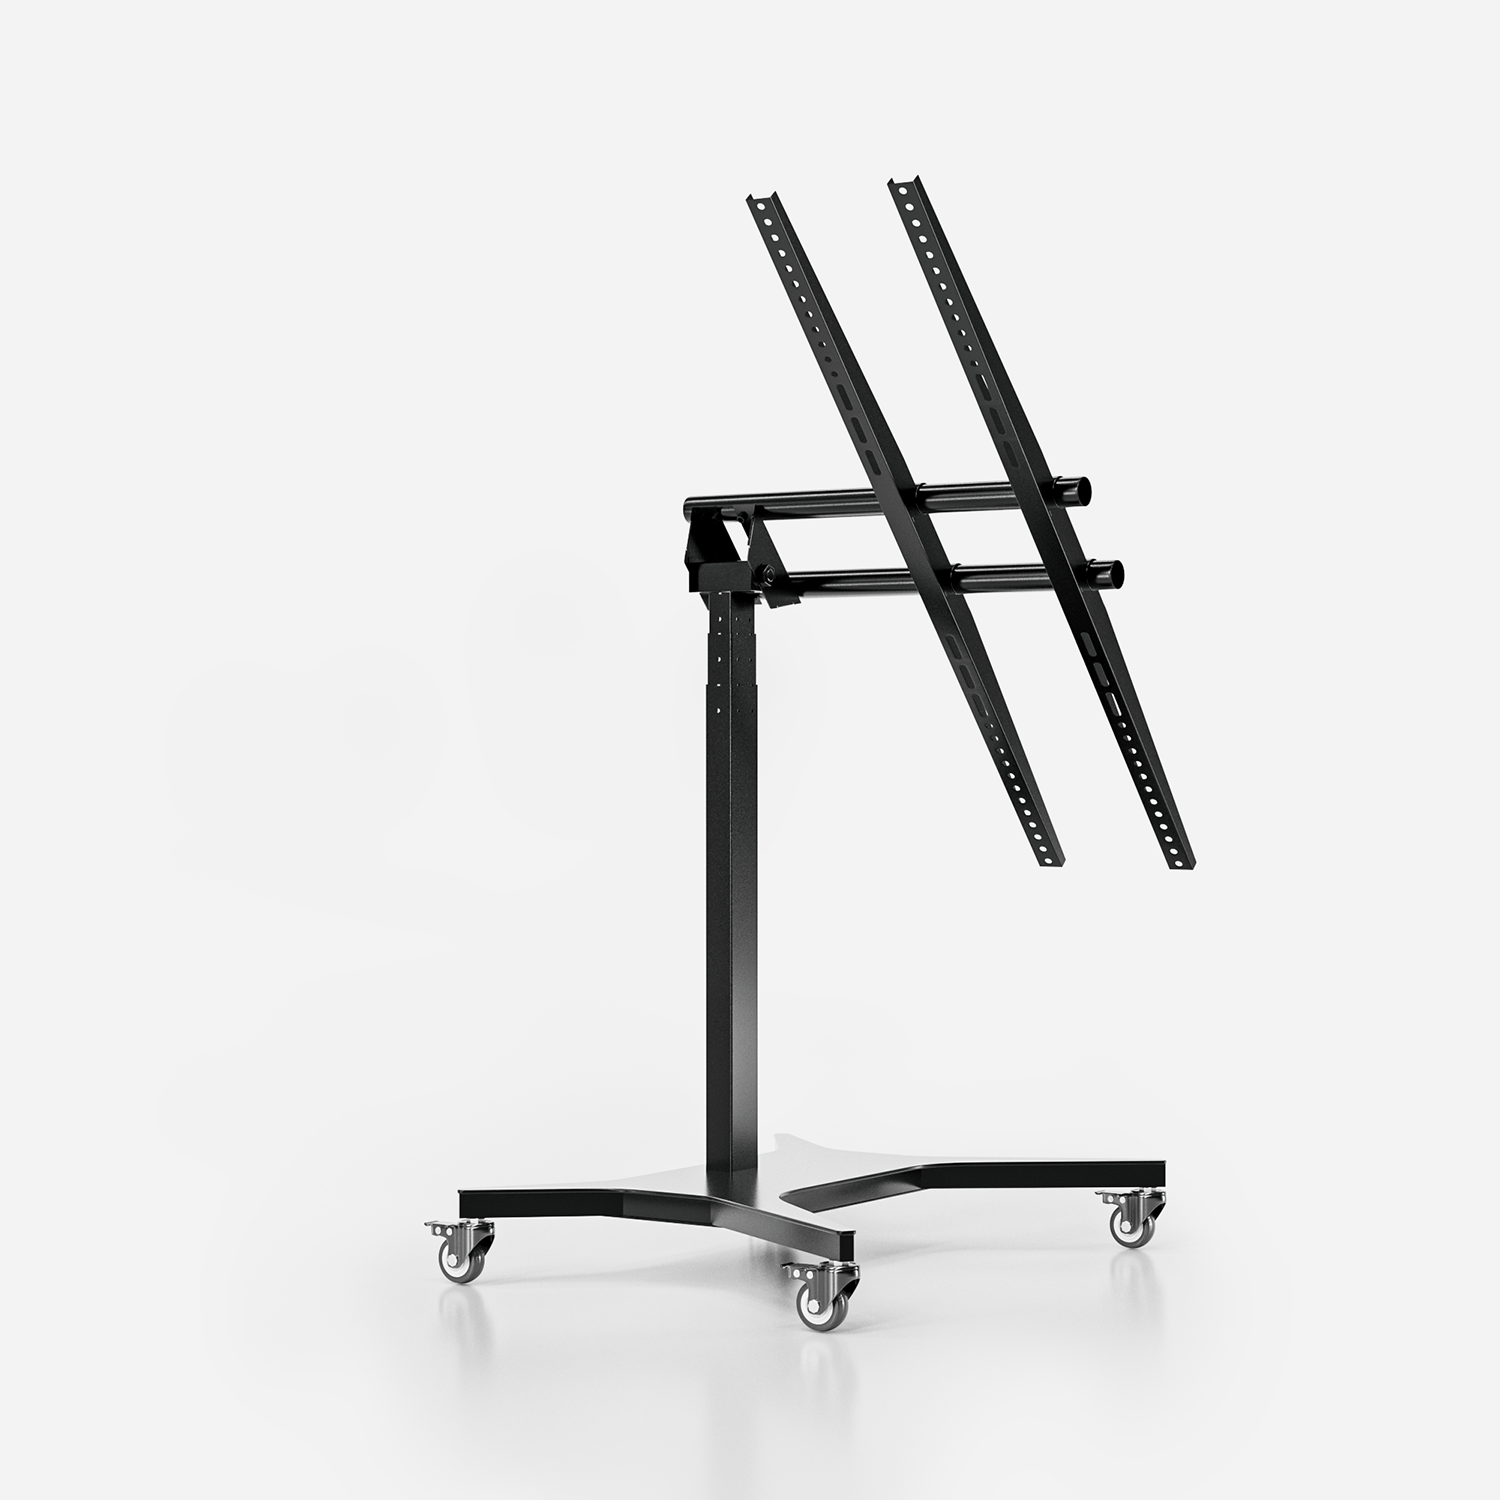 P3600+power stand